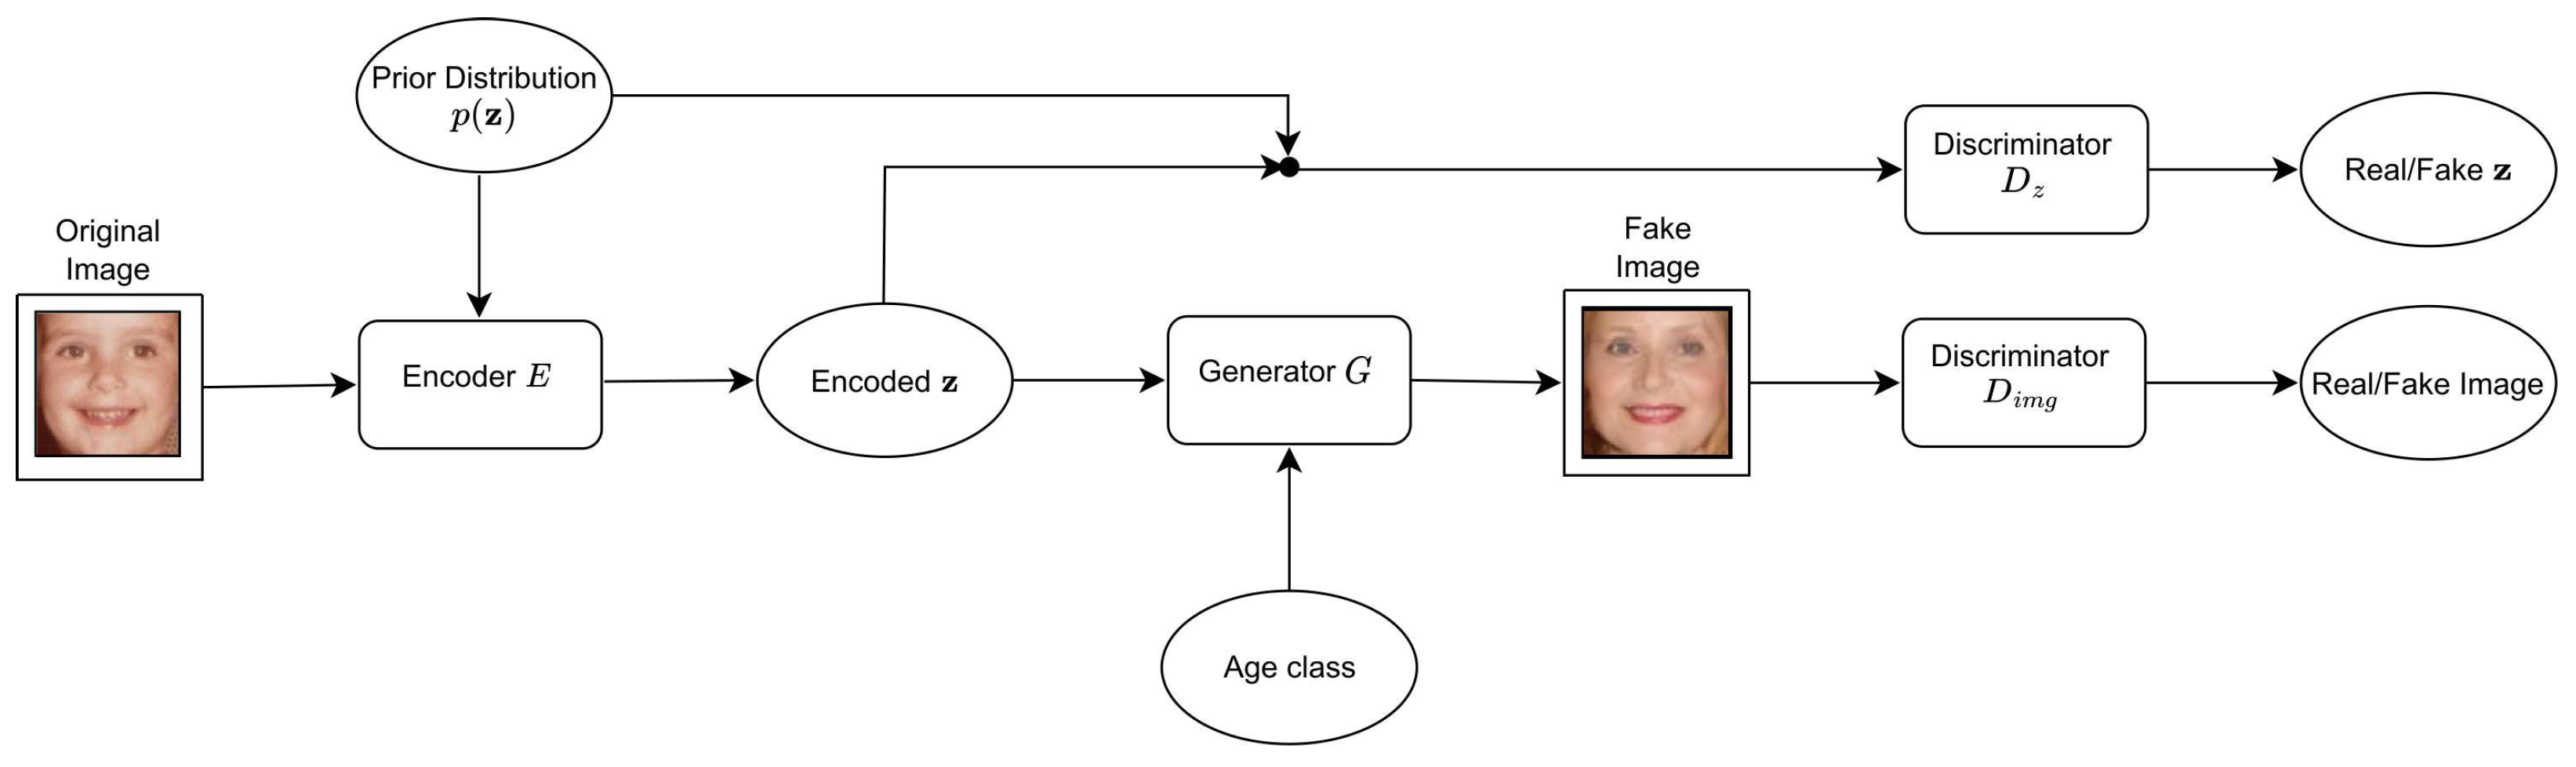 Best of 2017: Neural Network Learns to Synthetically Age Faces, and Make  Them Look Younger, Too, by The Physics arXiv Blog